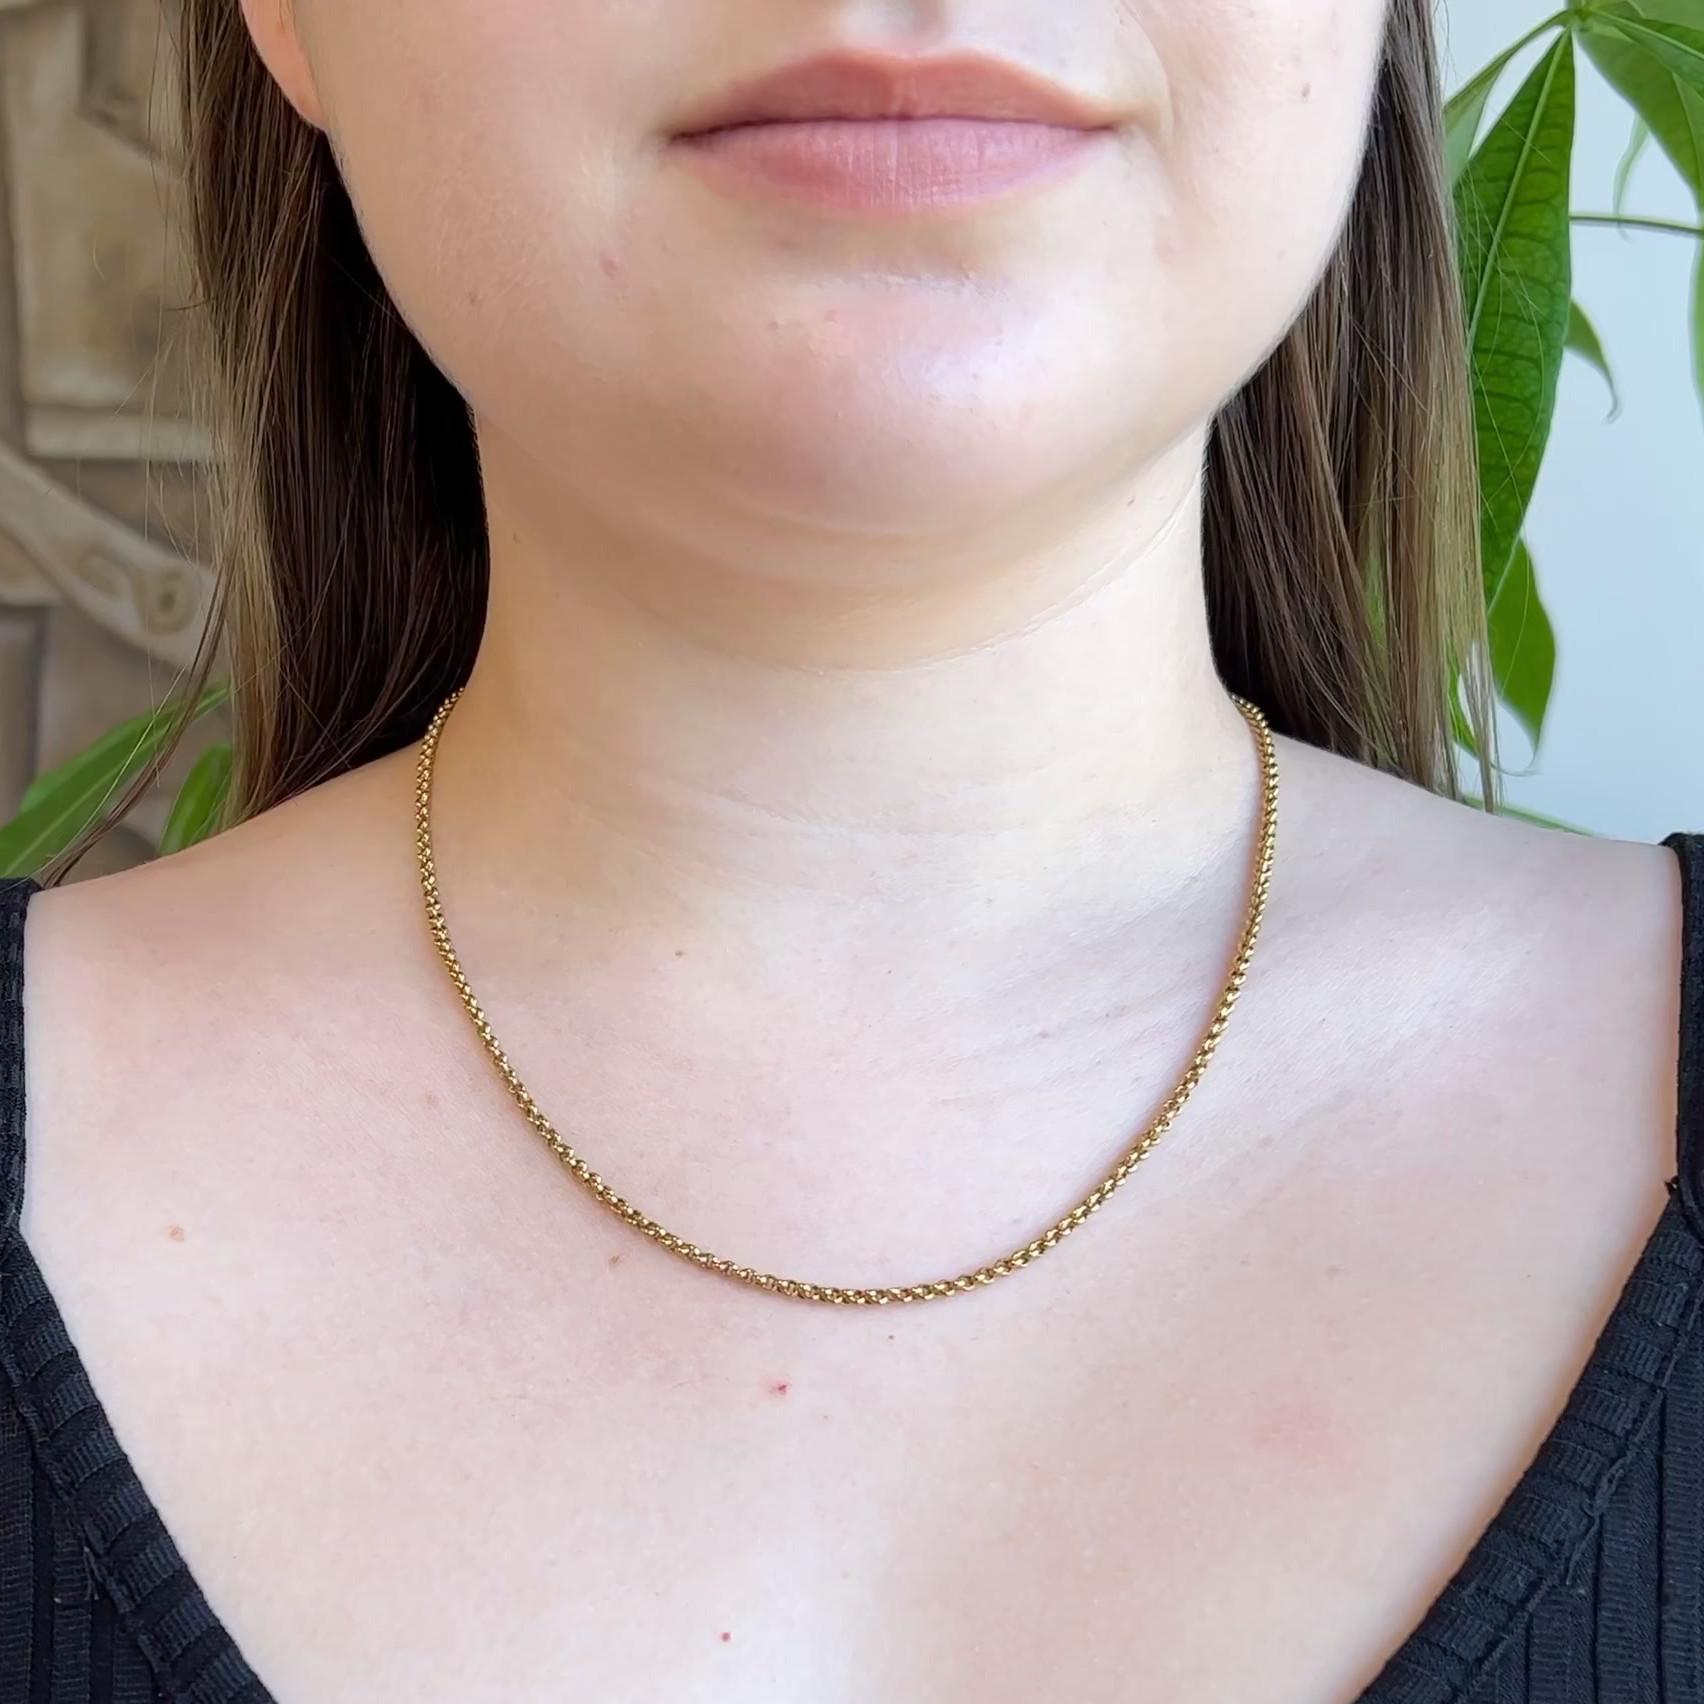 One Vintage David Yurman Italian 18 Karat Yellow Gold Box Chain Necklace. Crafted in 18 karat yellow gold with David Yurman makers marks and Italian hallmarks. Circa 1990. The necklace is 18 inches in length.

About this Item: Add sophisticated